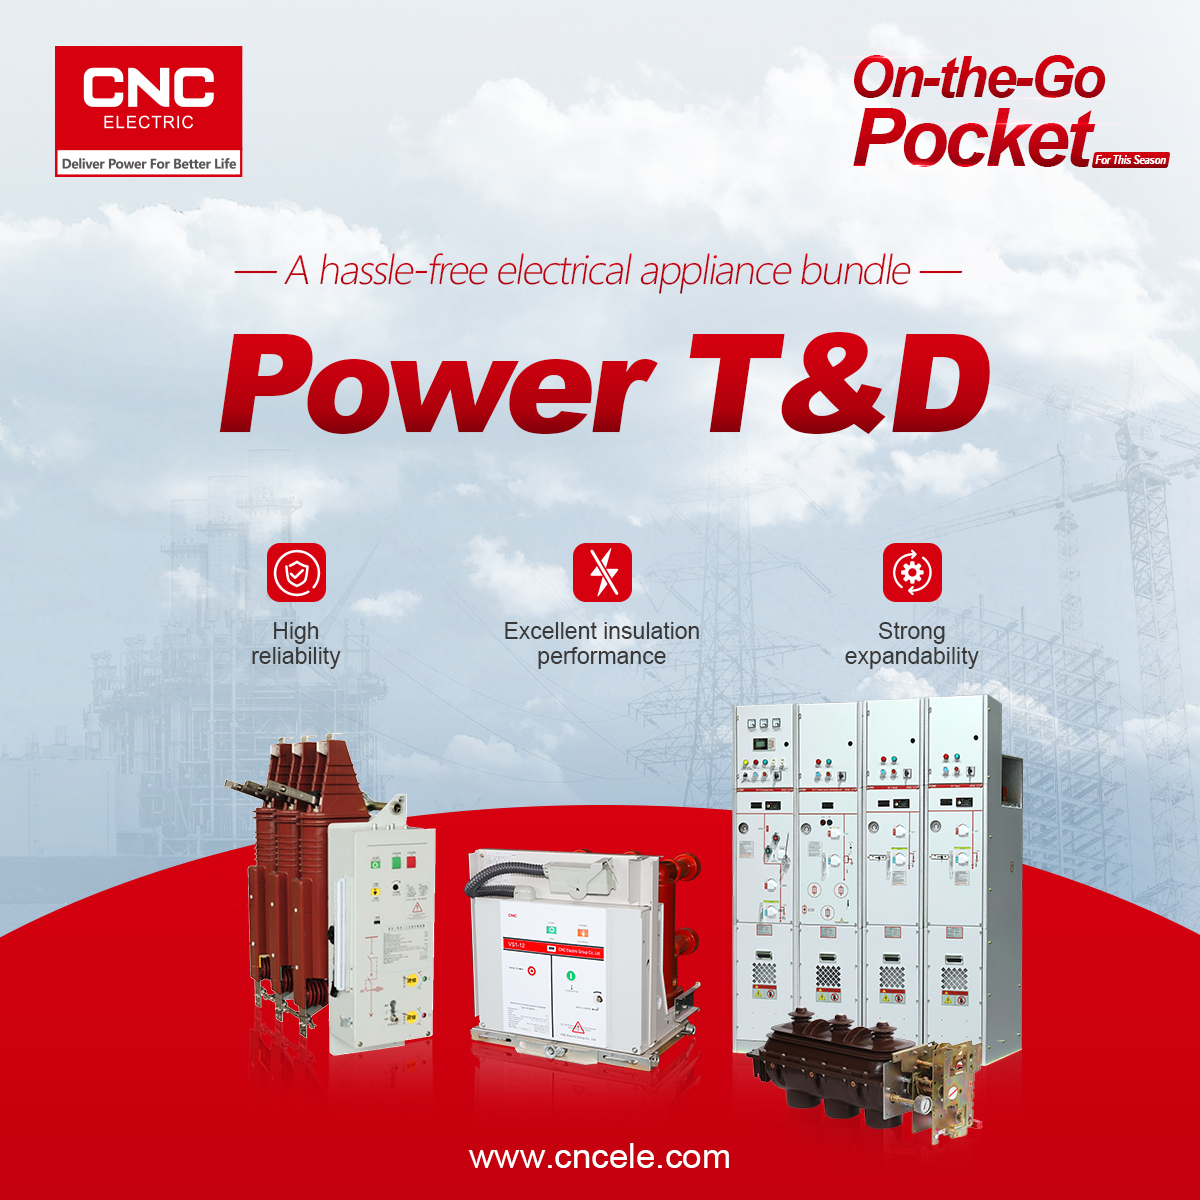 CNC | On-the-Go Pocket Launches the Fourth Series of Bestselling and Practical Power T&D